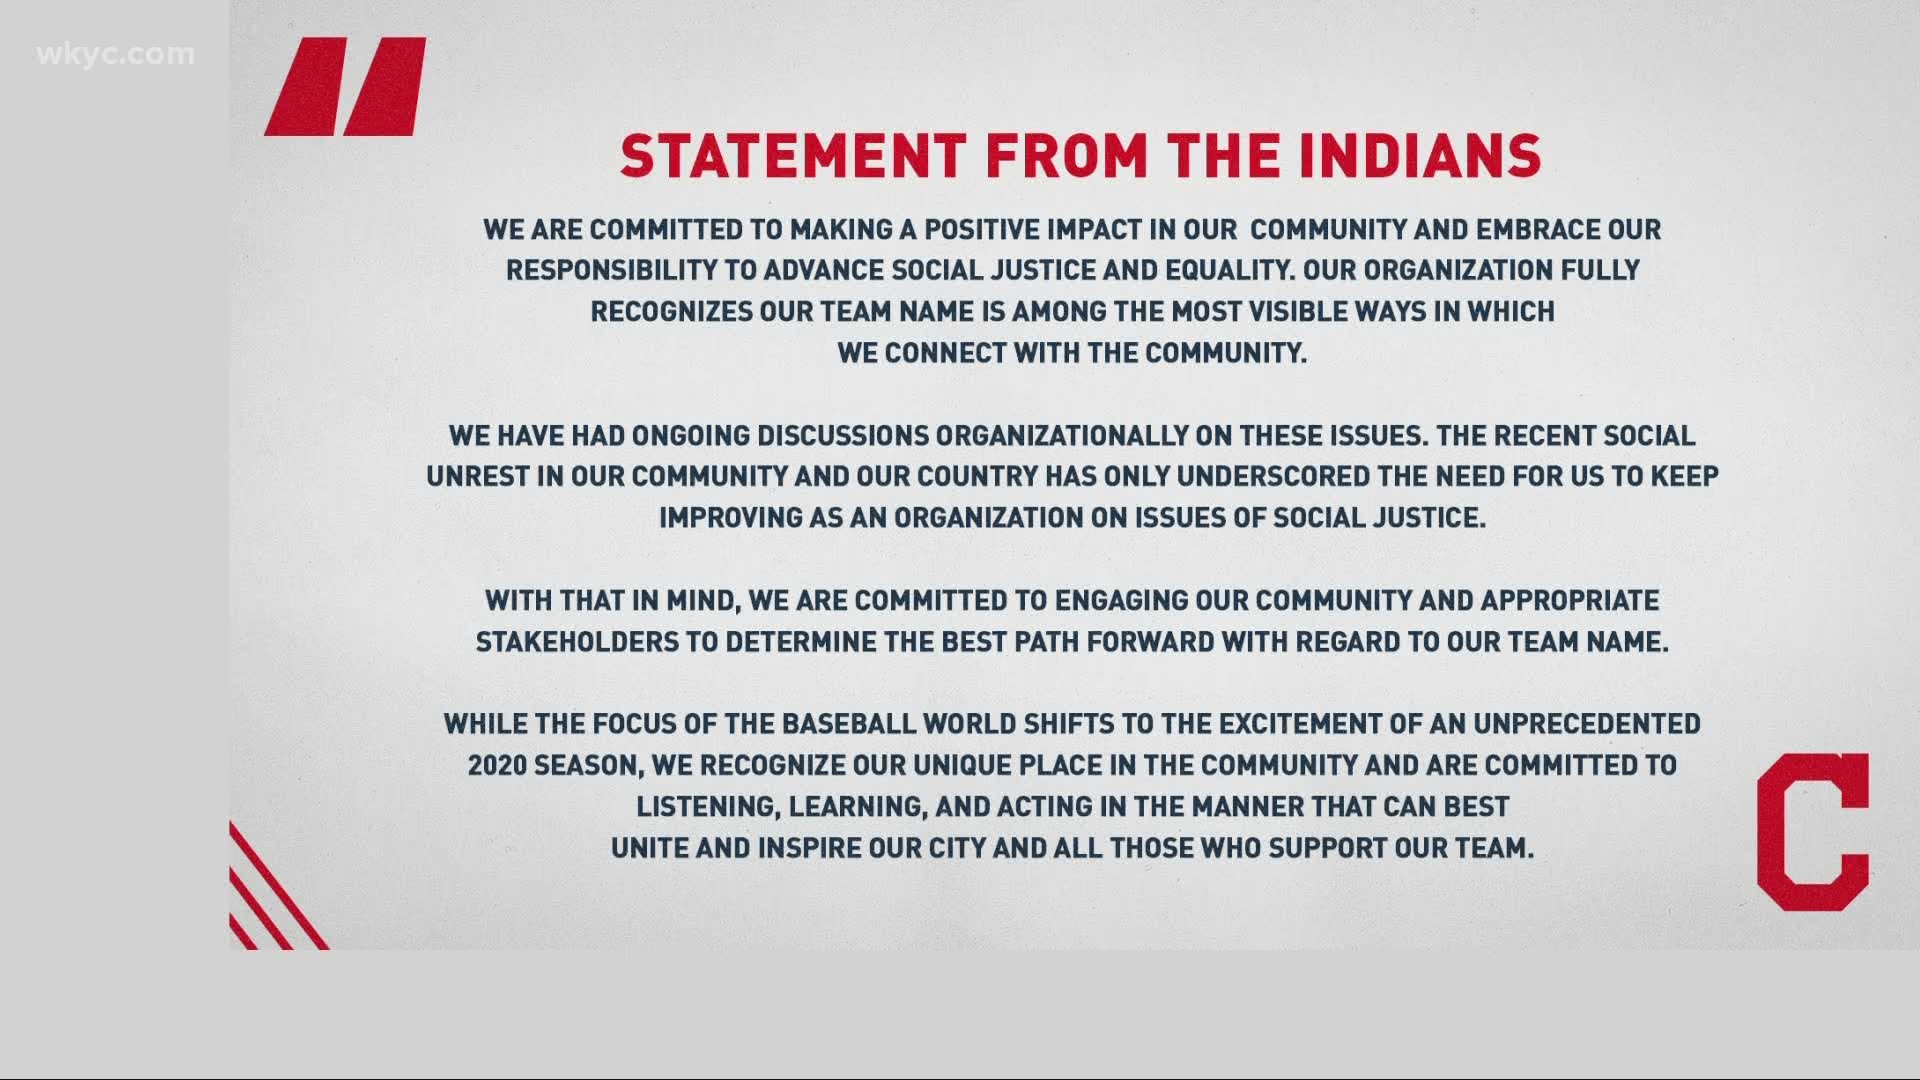 The statement from the Indians comes as the Washington Redskins are examining the future of its nickname. The Tribe removed Chief Wahoo prior to the 2019 season.